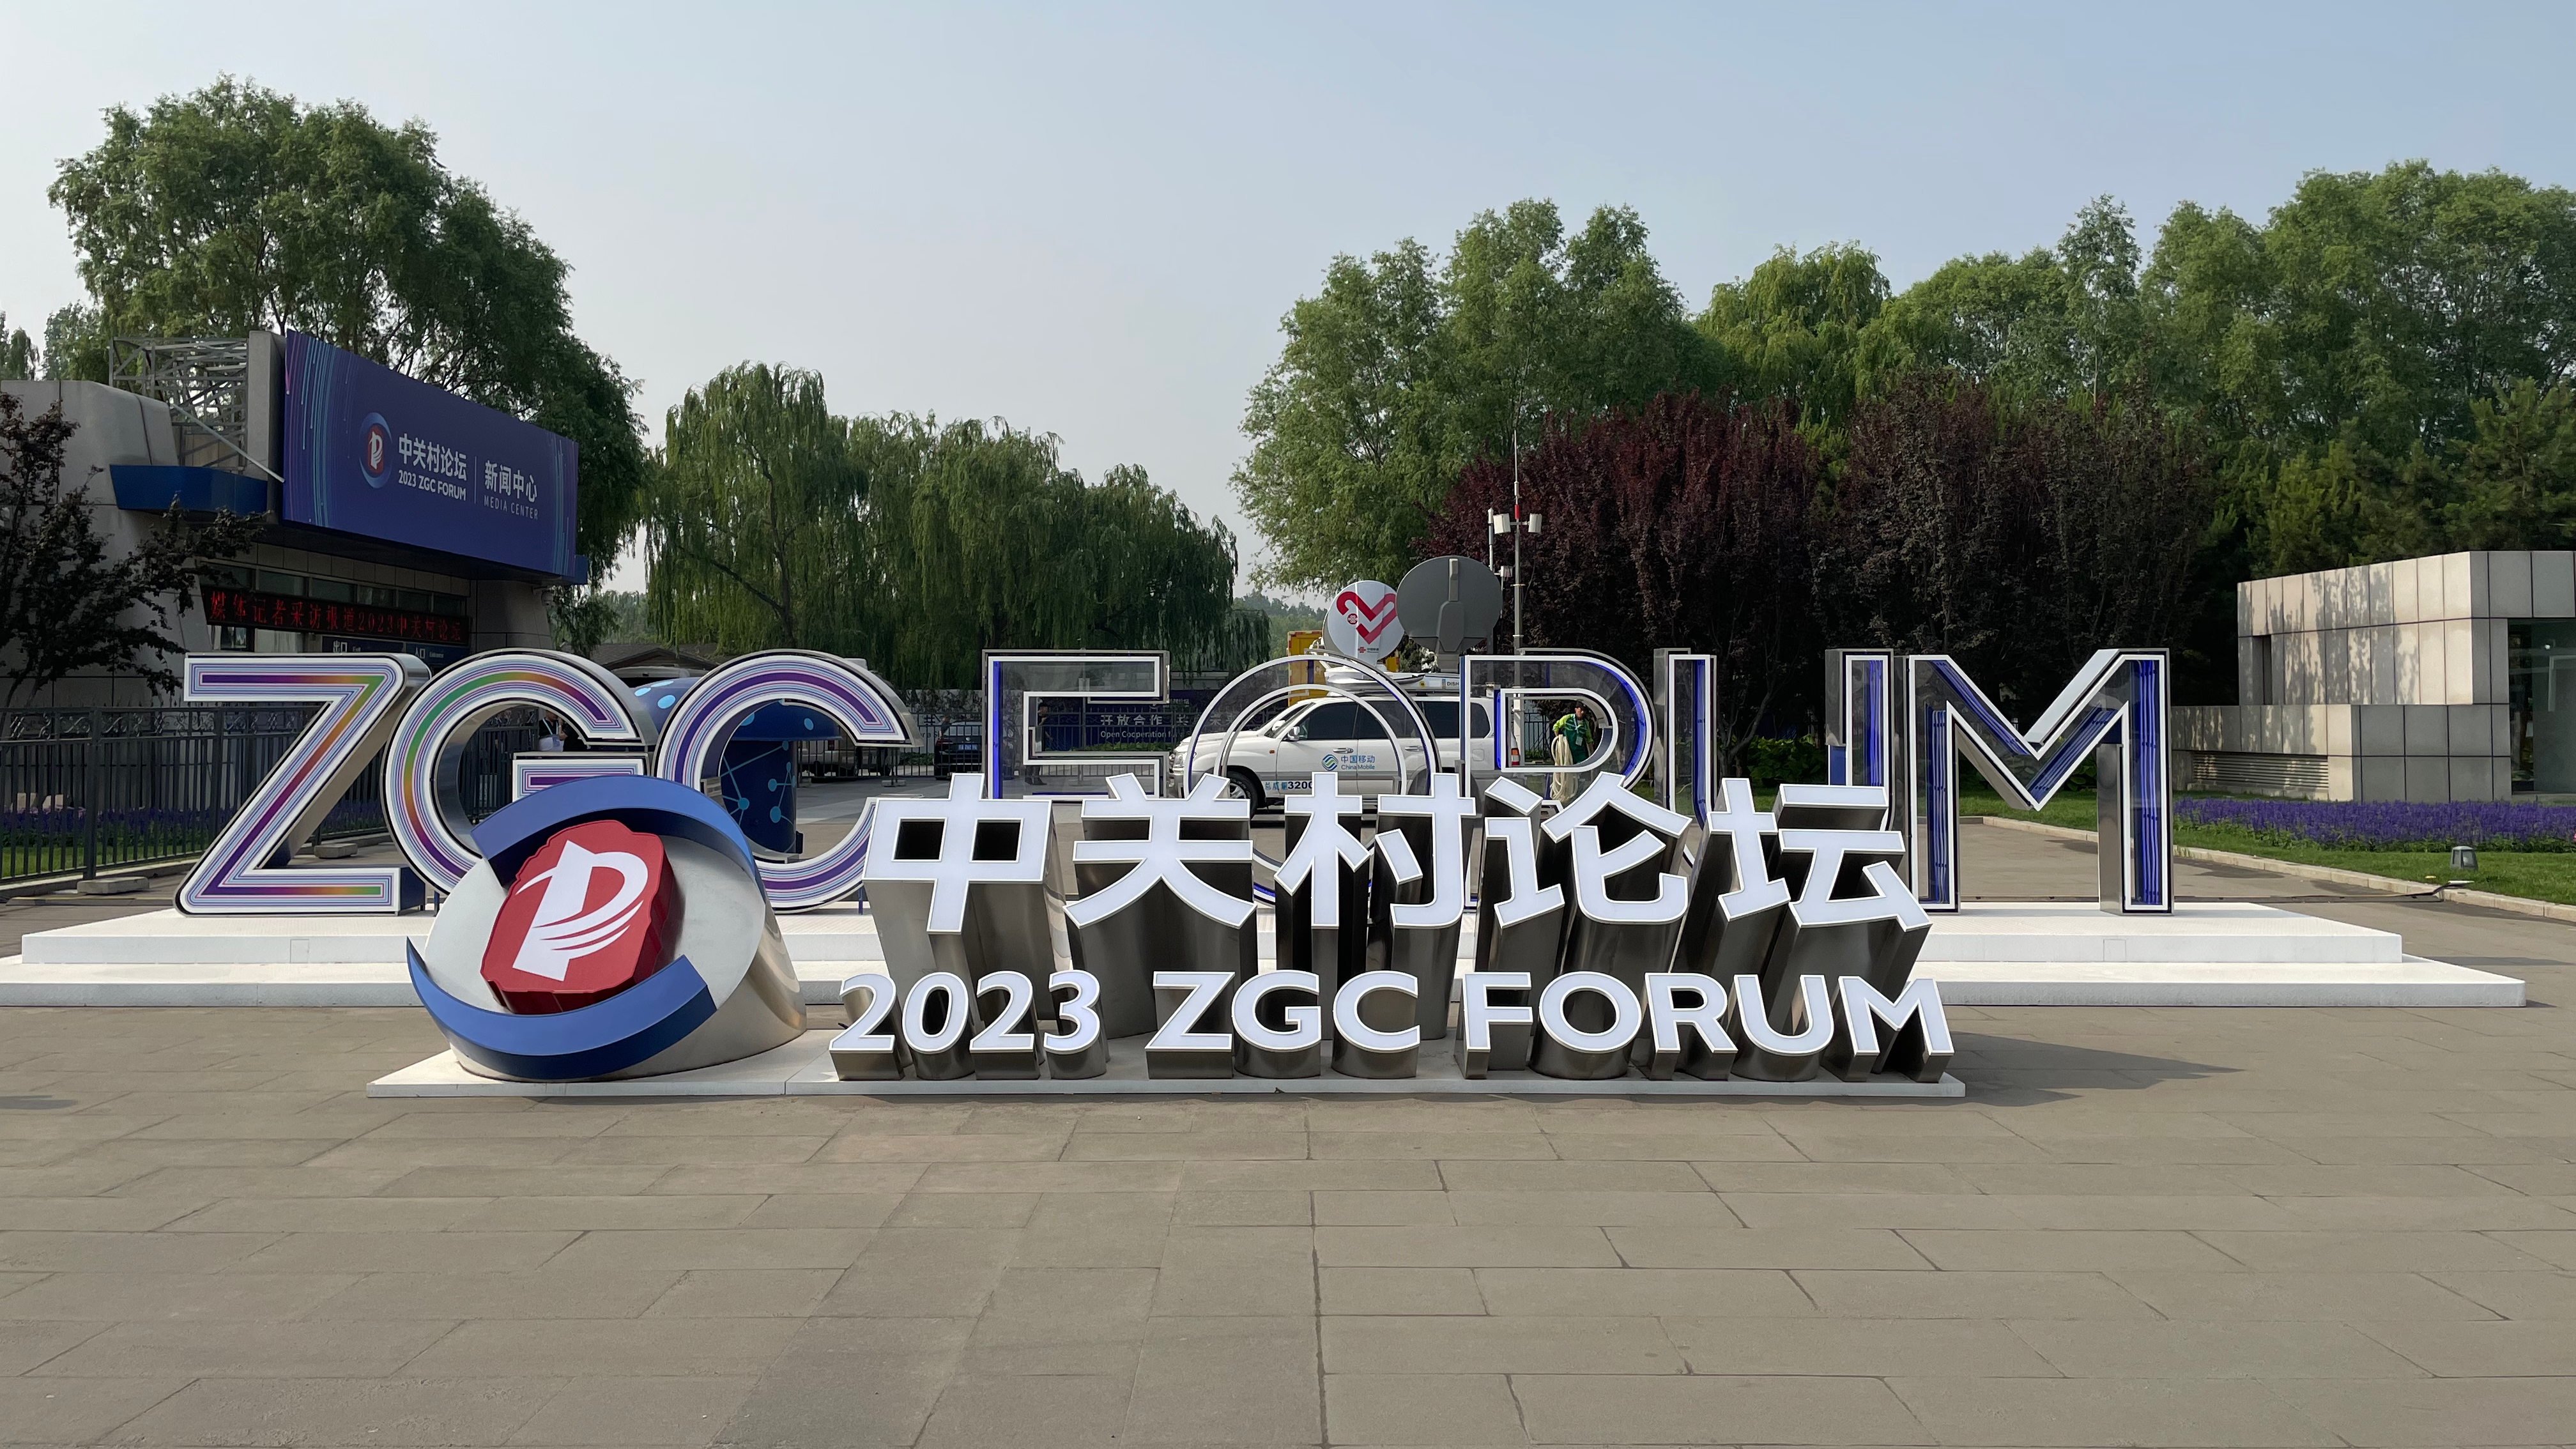 Live: Tech in real-time at the 2023 ZGC Forum